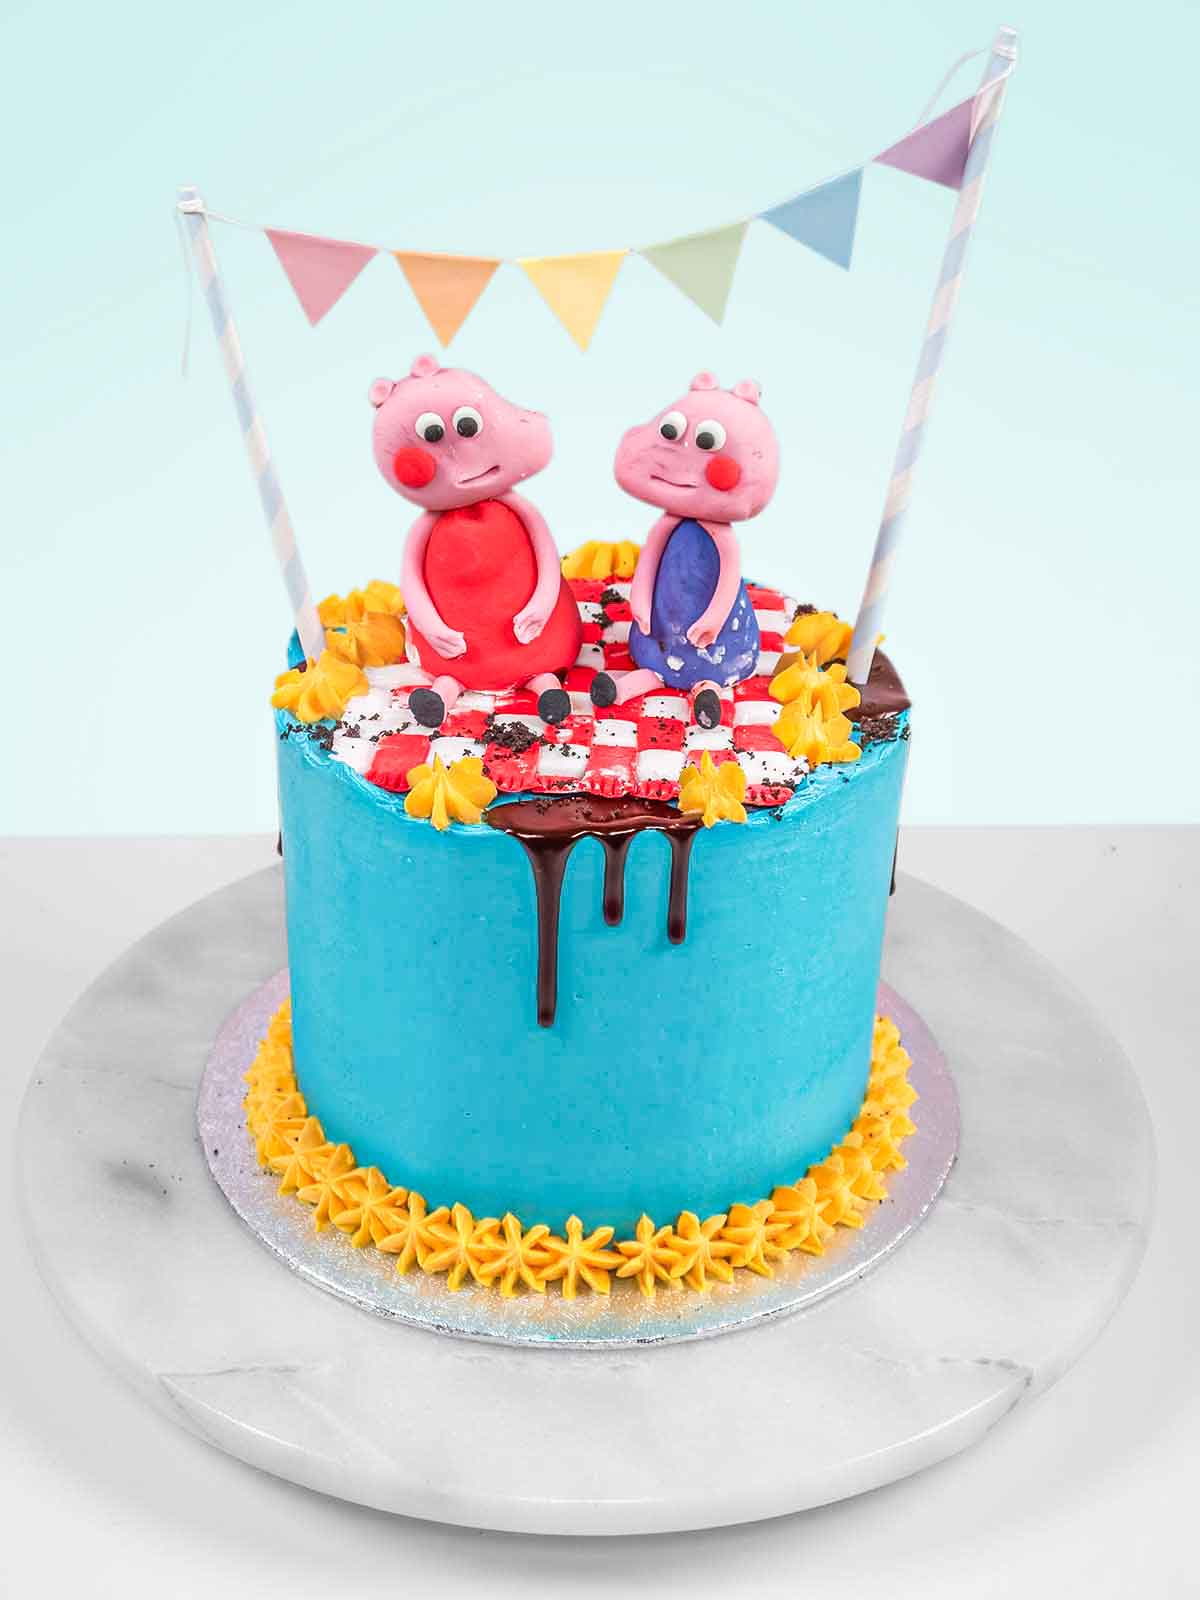 Cakeology - Cute Peppa pig cake for a 2nd birthday!🥳🐽🍄🍭🌸 | Facebook